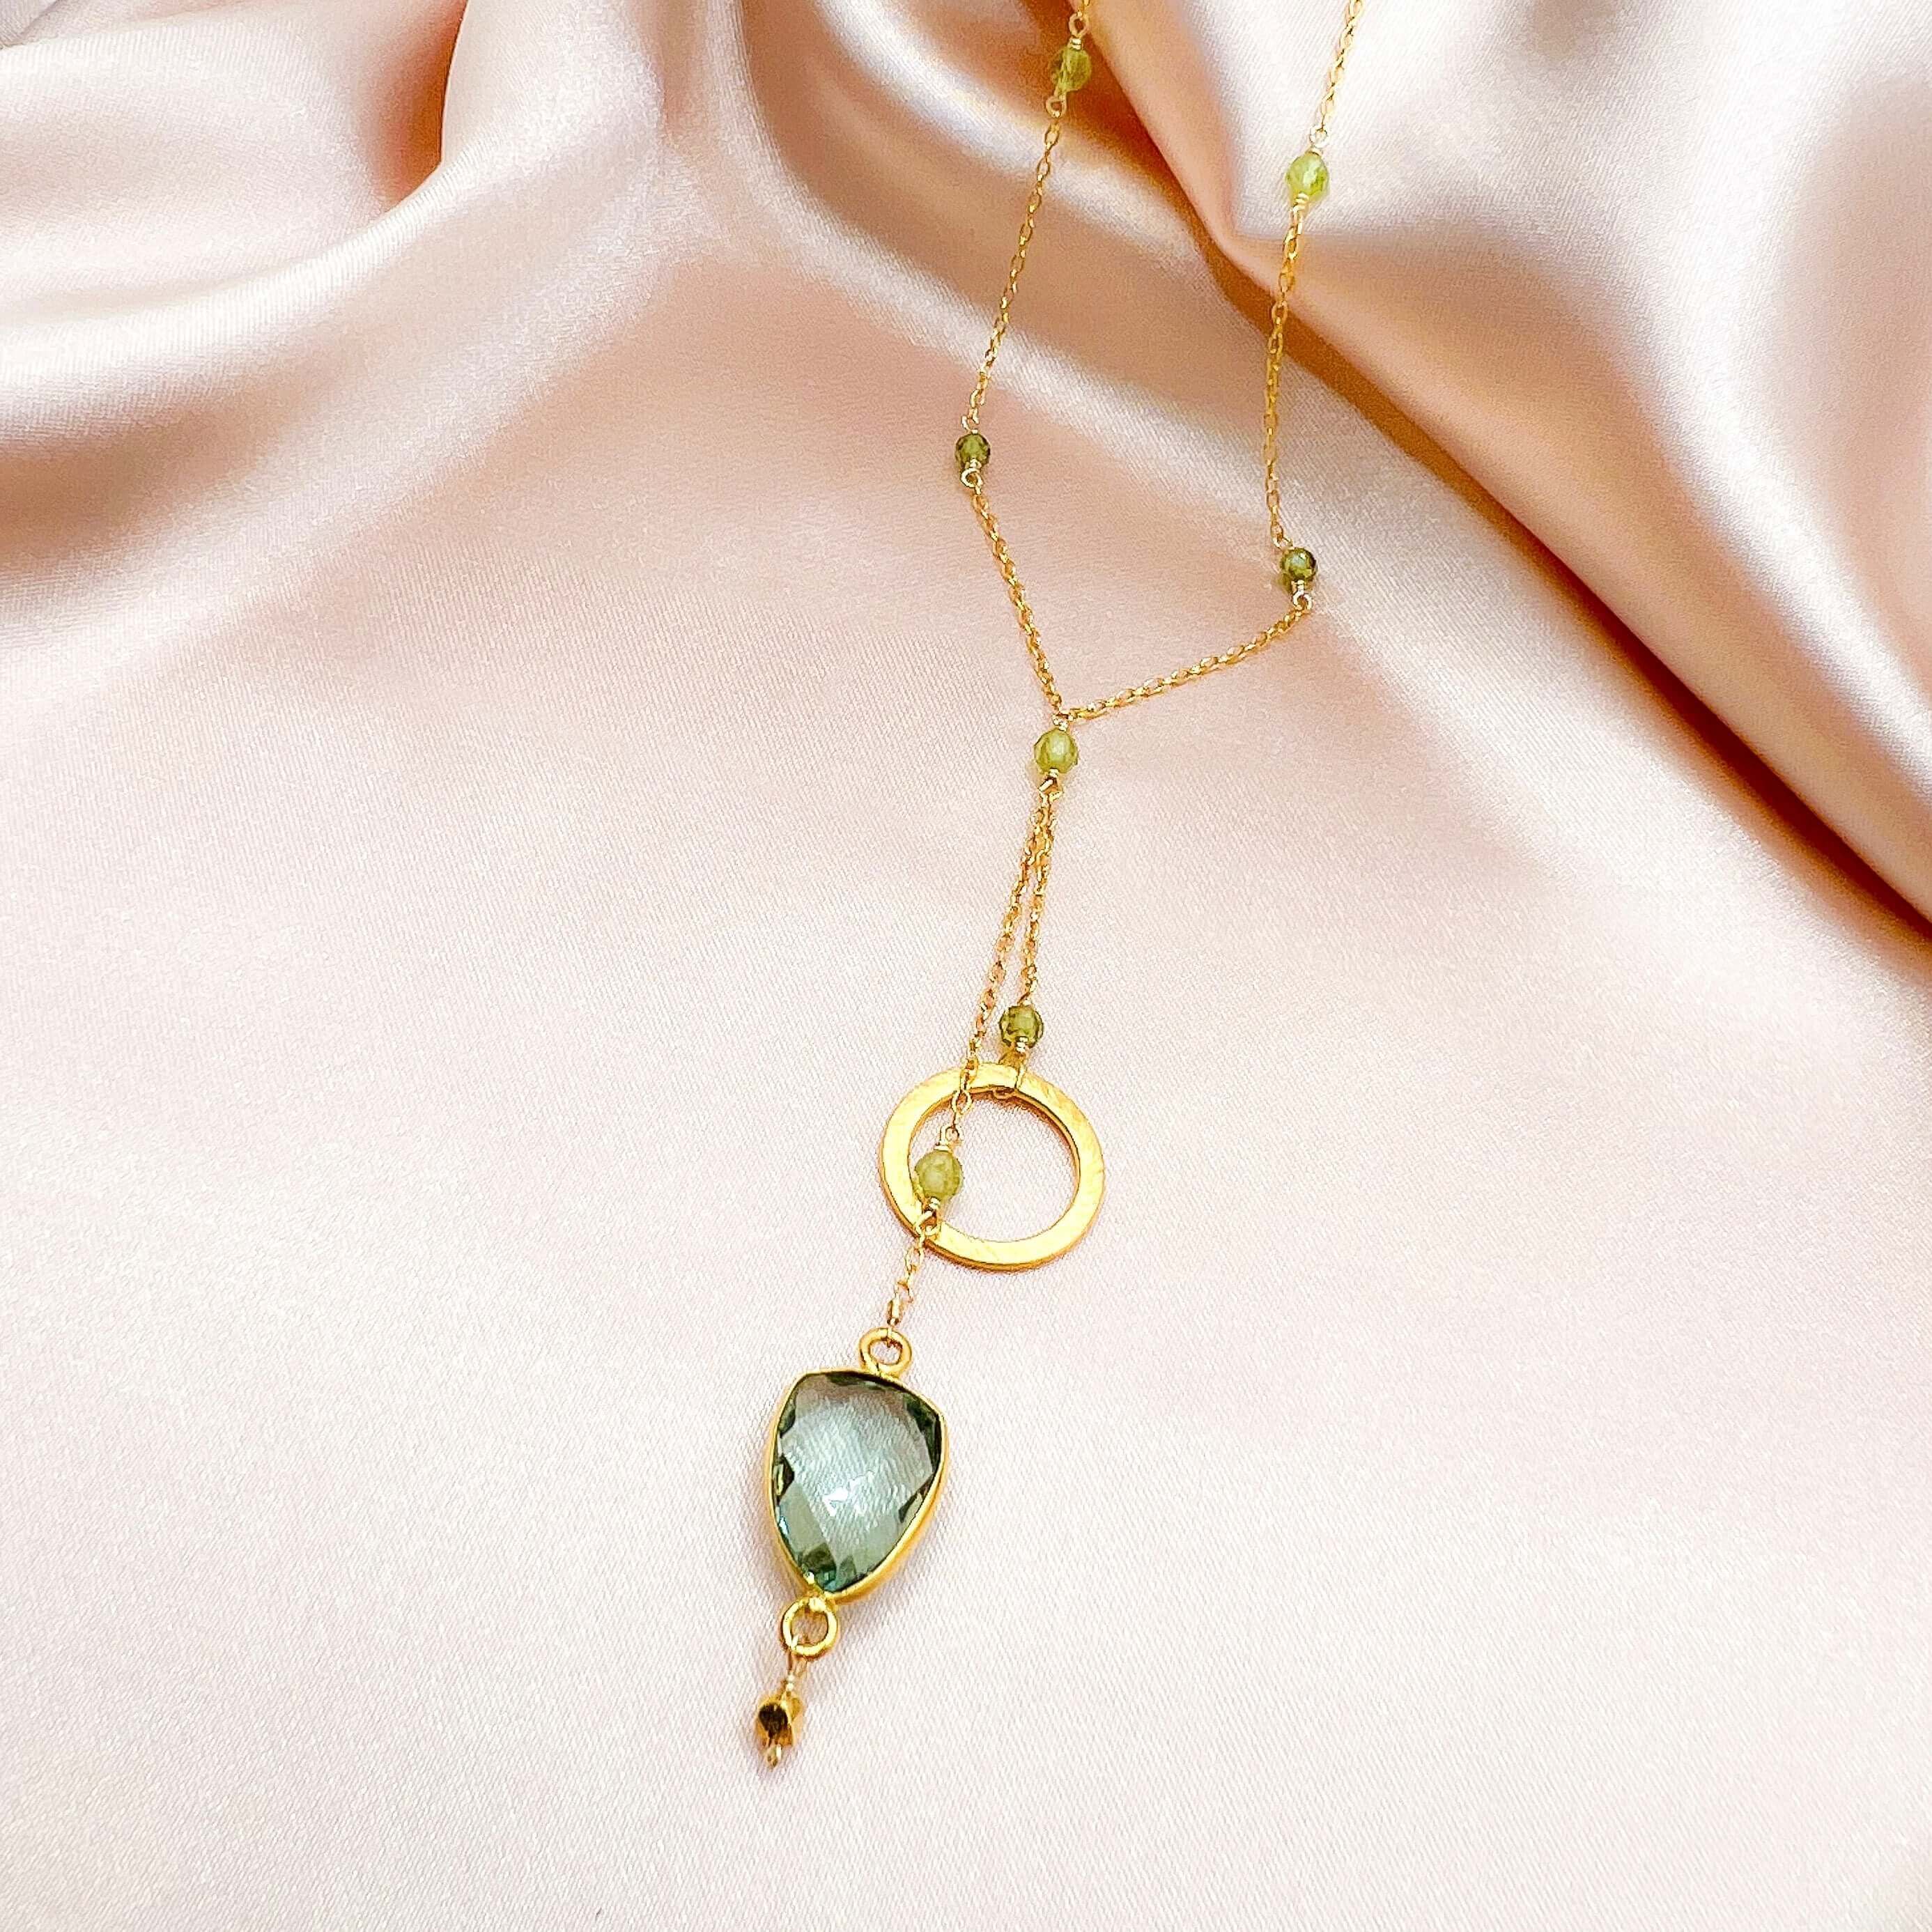 Graceful Green Amethyst Circle Necklace – 14k Gold Plated.